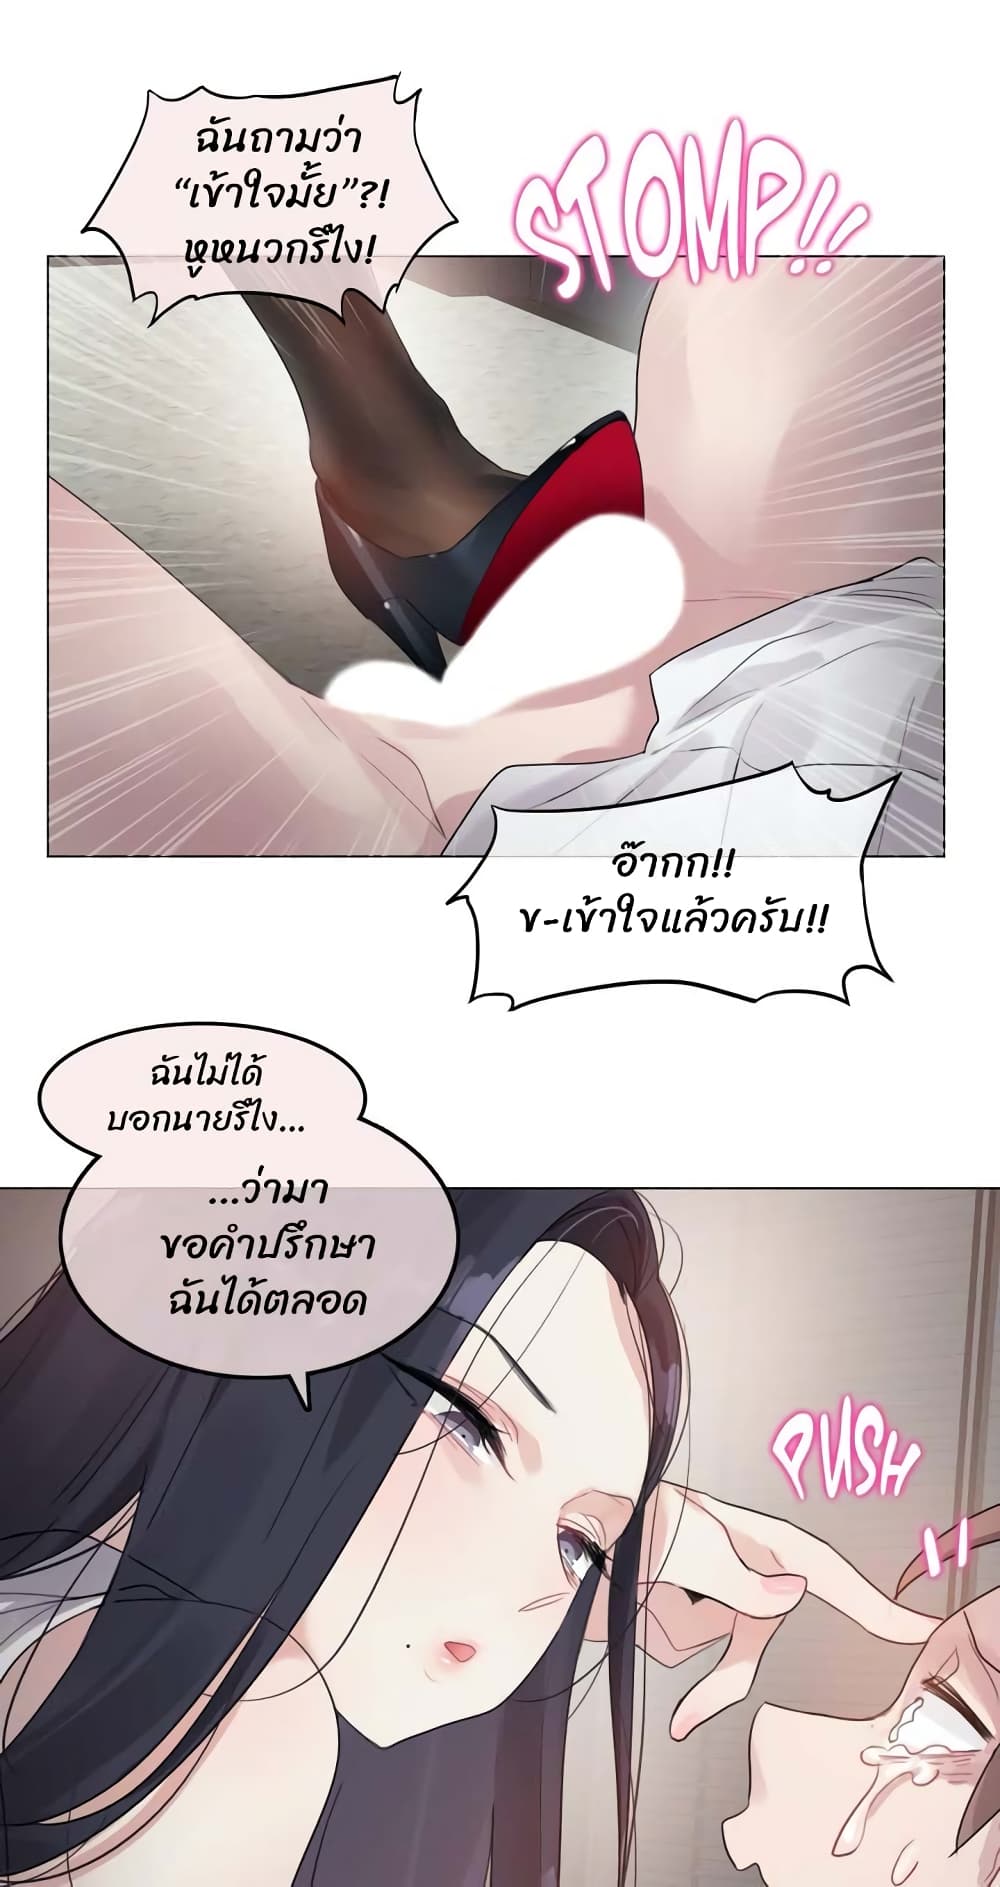 A Pervert's Daily Life 96 (21)